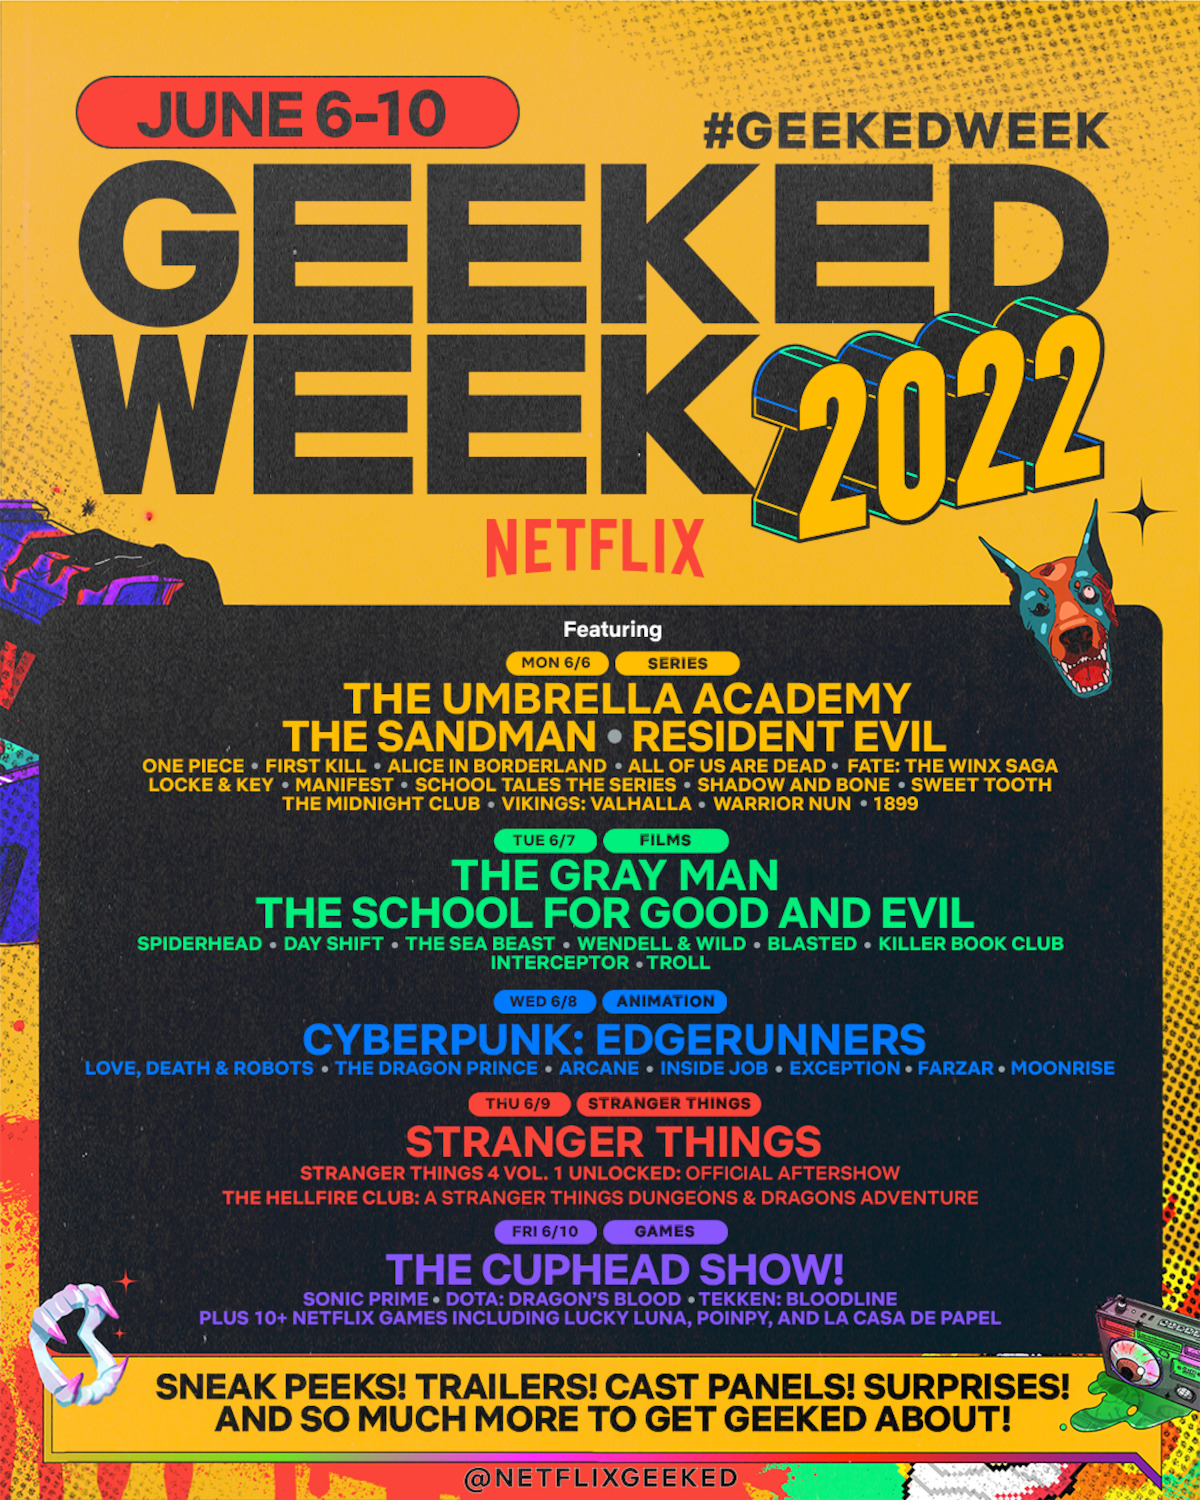 Netflix Geeked - still not over the animation from the